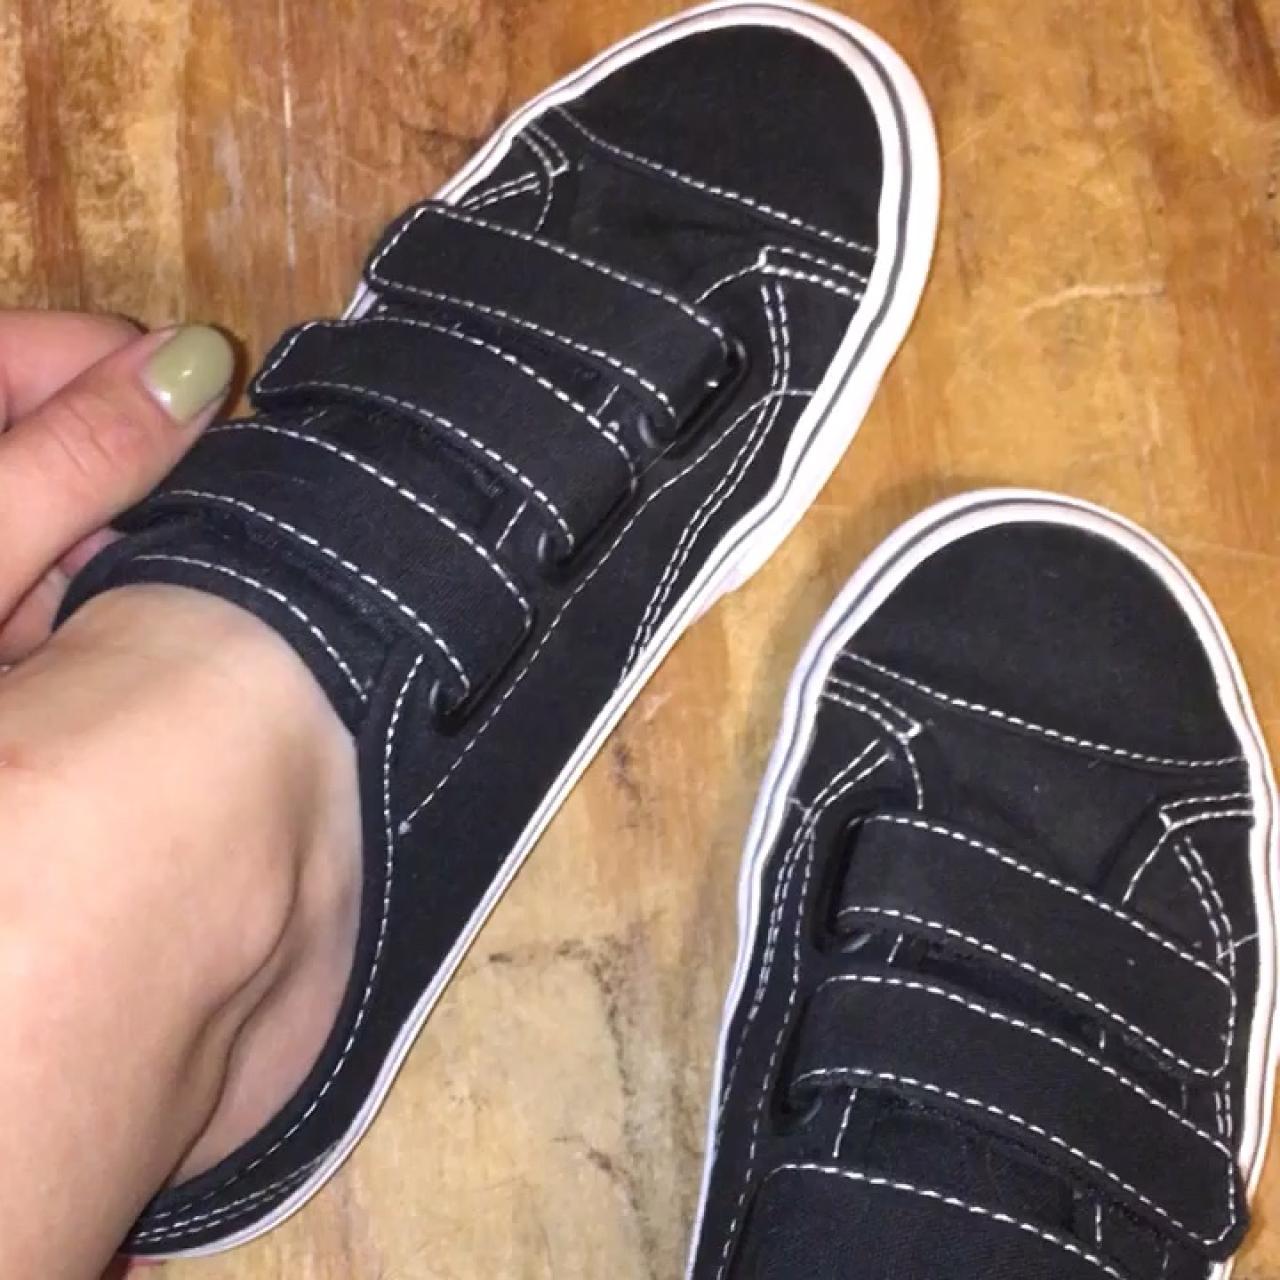 vans with straps on feet